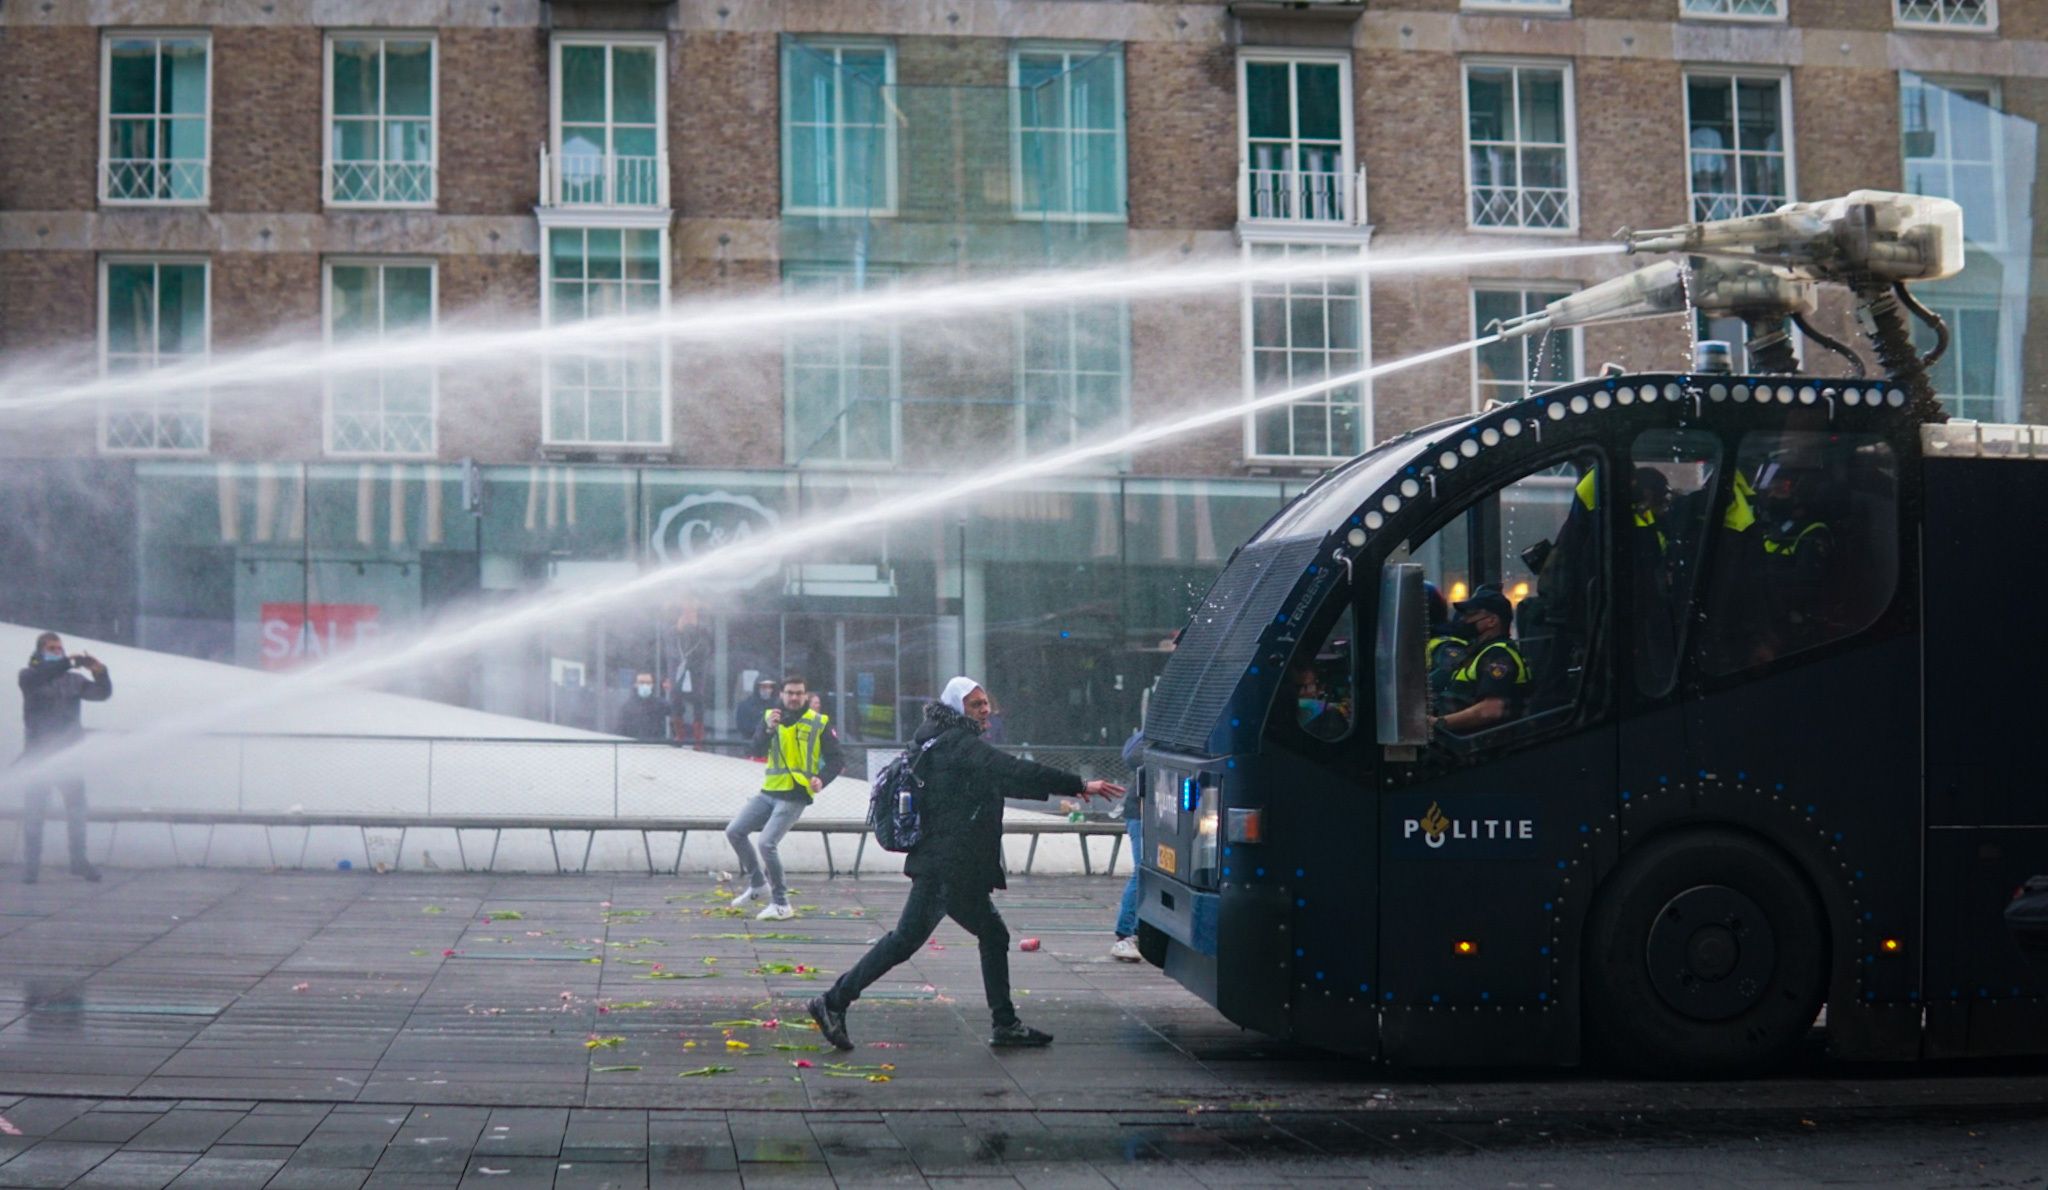 Photo of a truck spraying protesters with water cannon